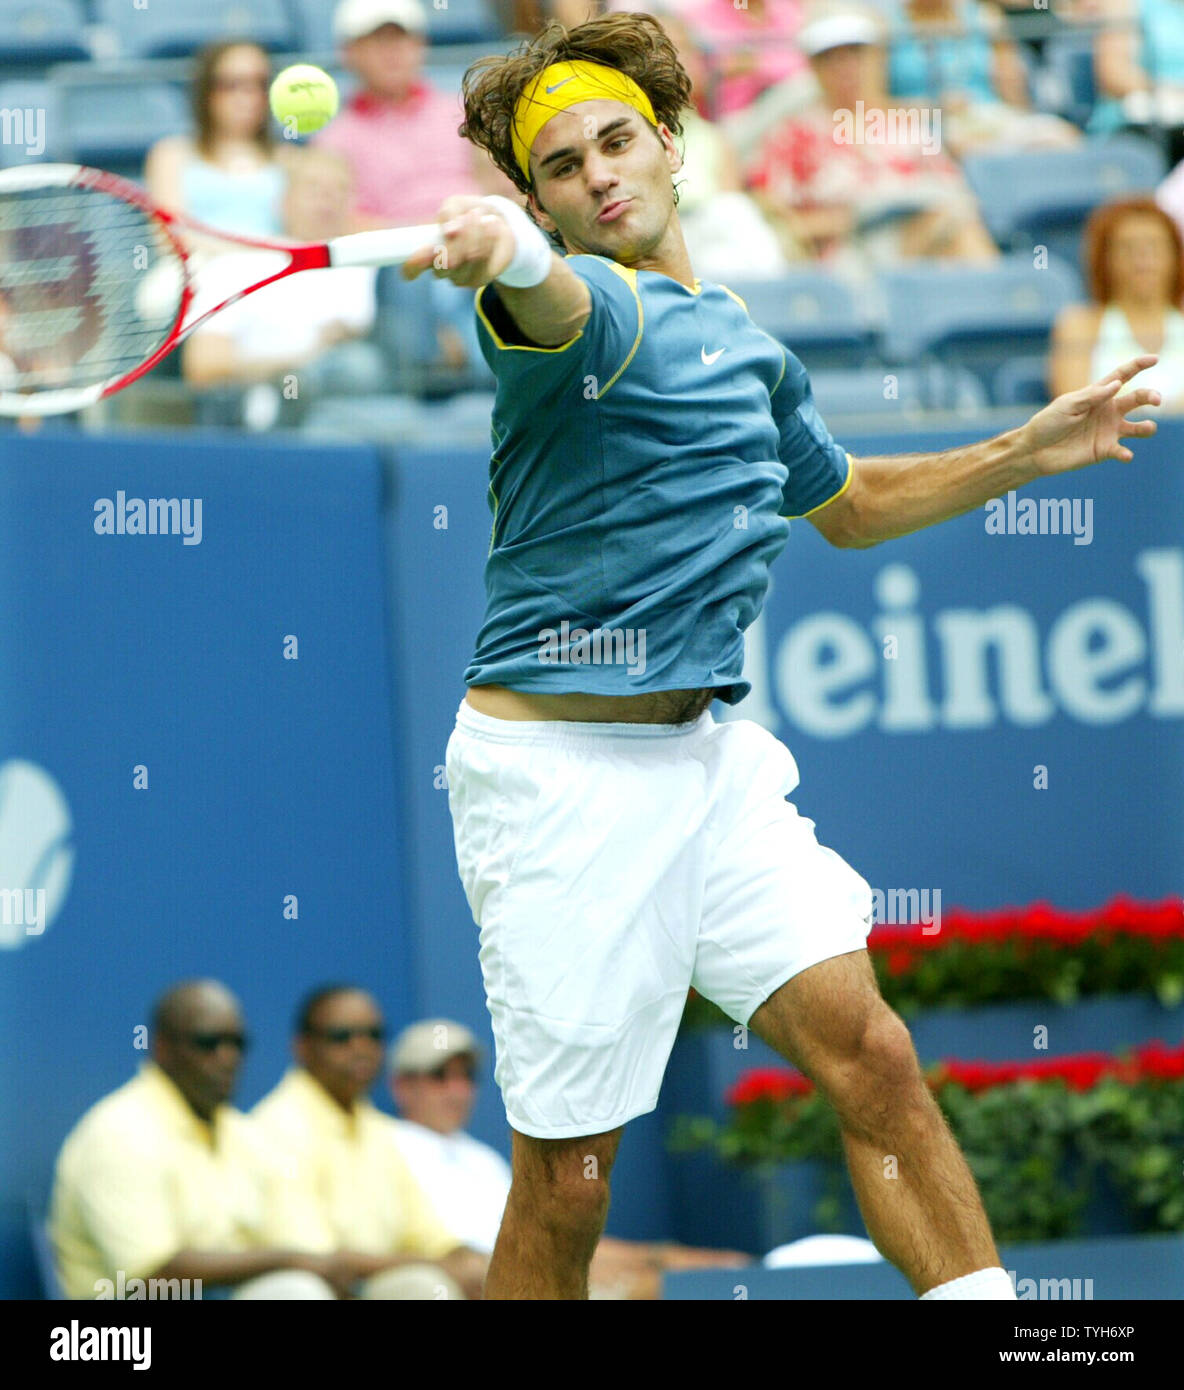 Roger Federer of Switzerland, winner of last year's US Open, returns the  ball to Ivo Minar of the Czech Republic and goes on to win 6-1, 6-1, 6-1  during the US Open